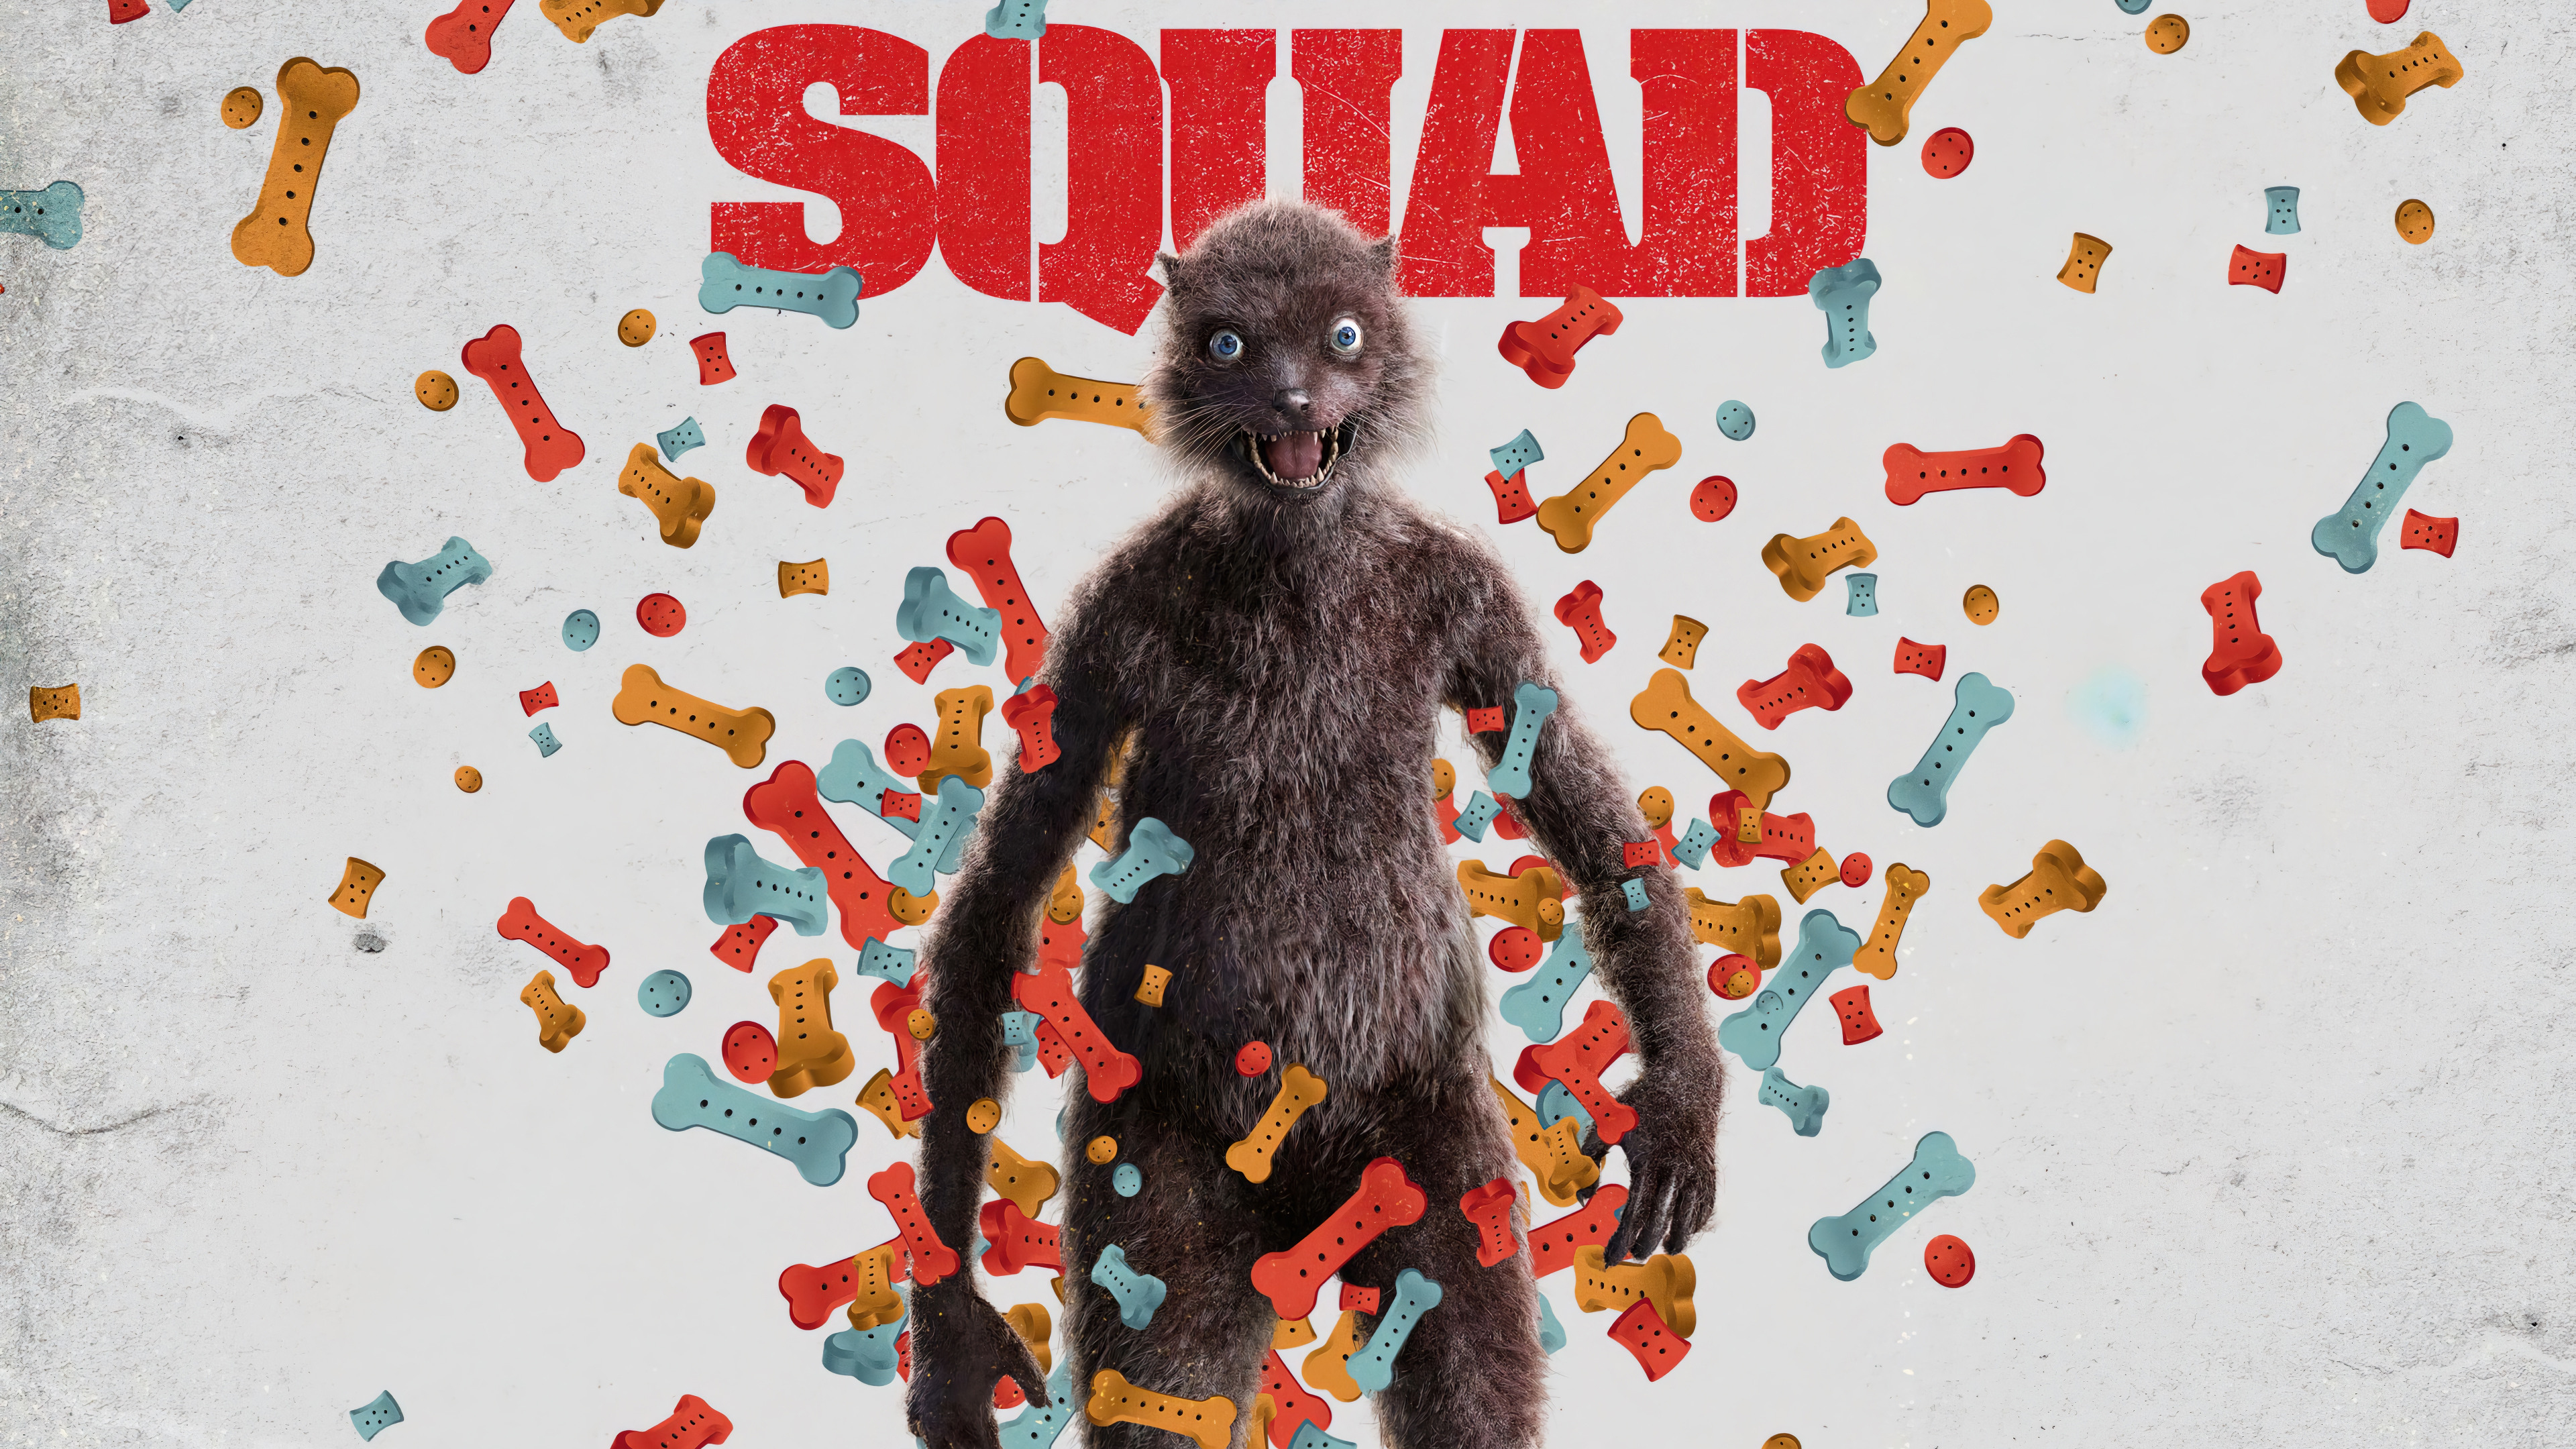 Weasel K HD The Suicide Squad